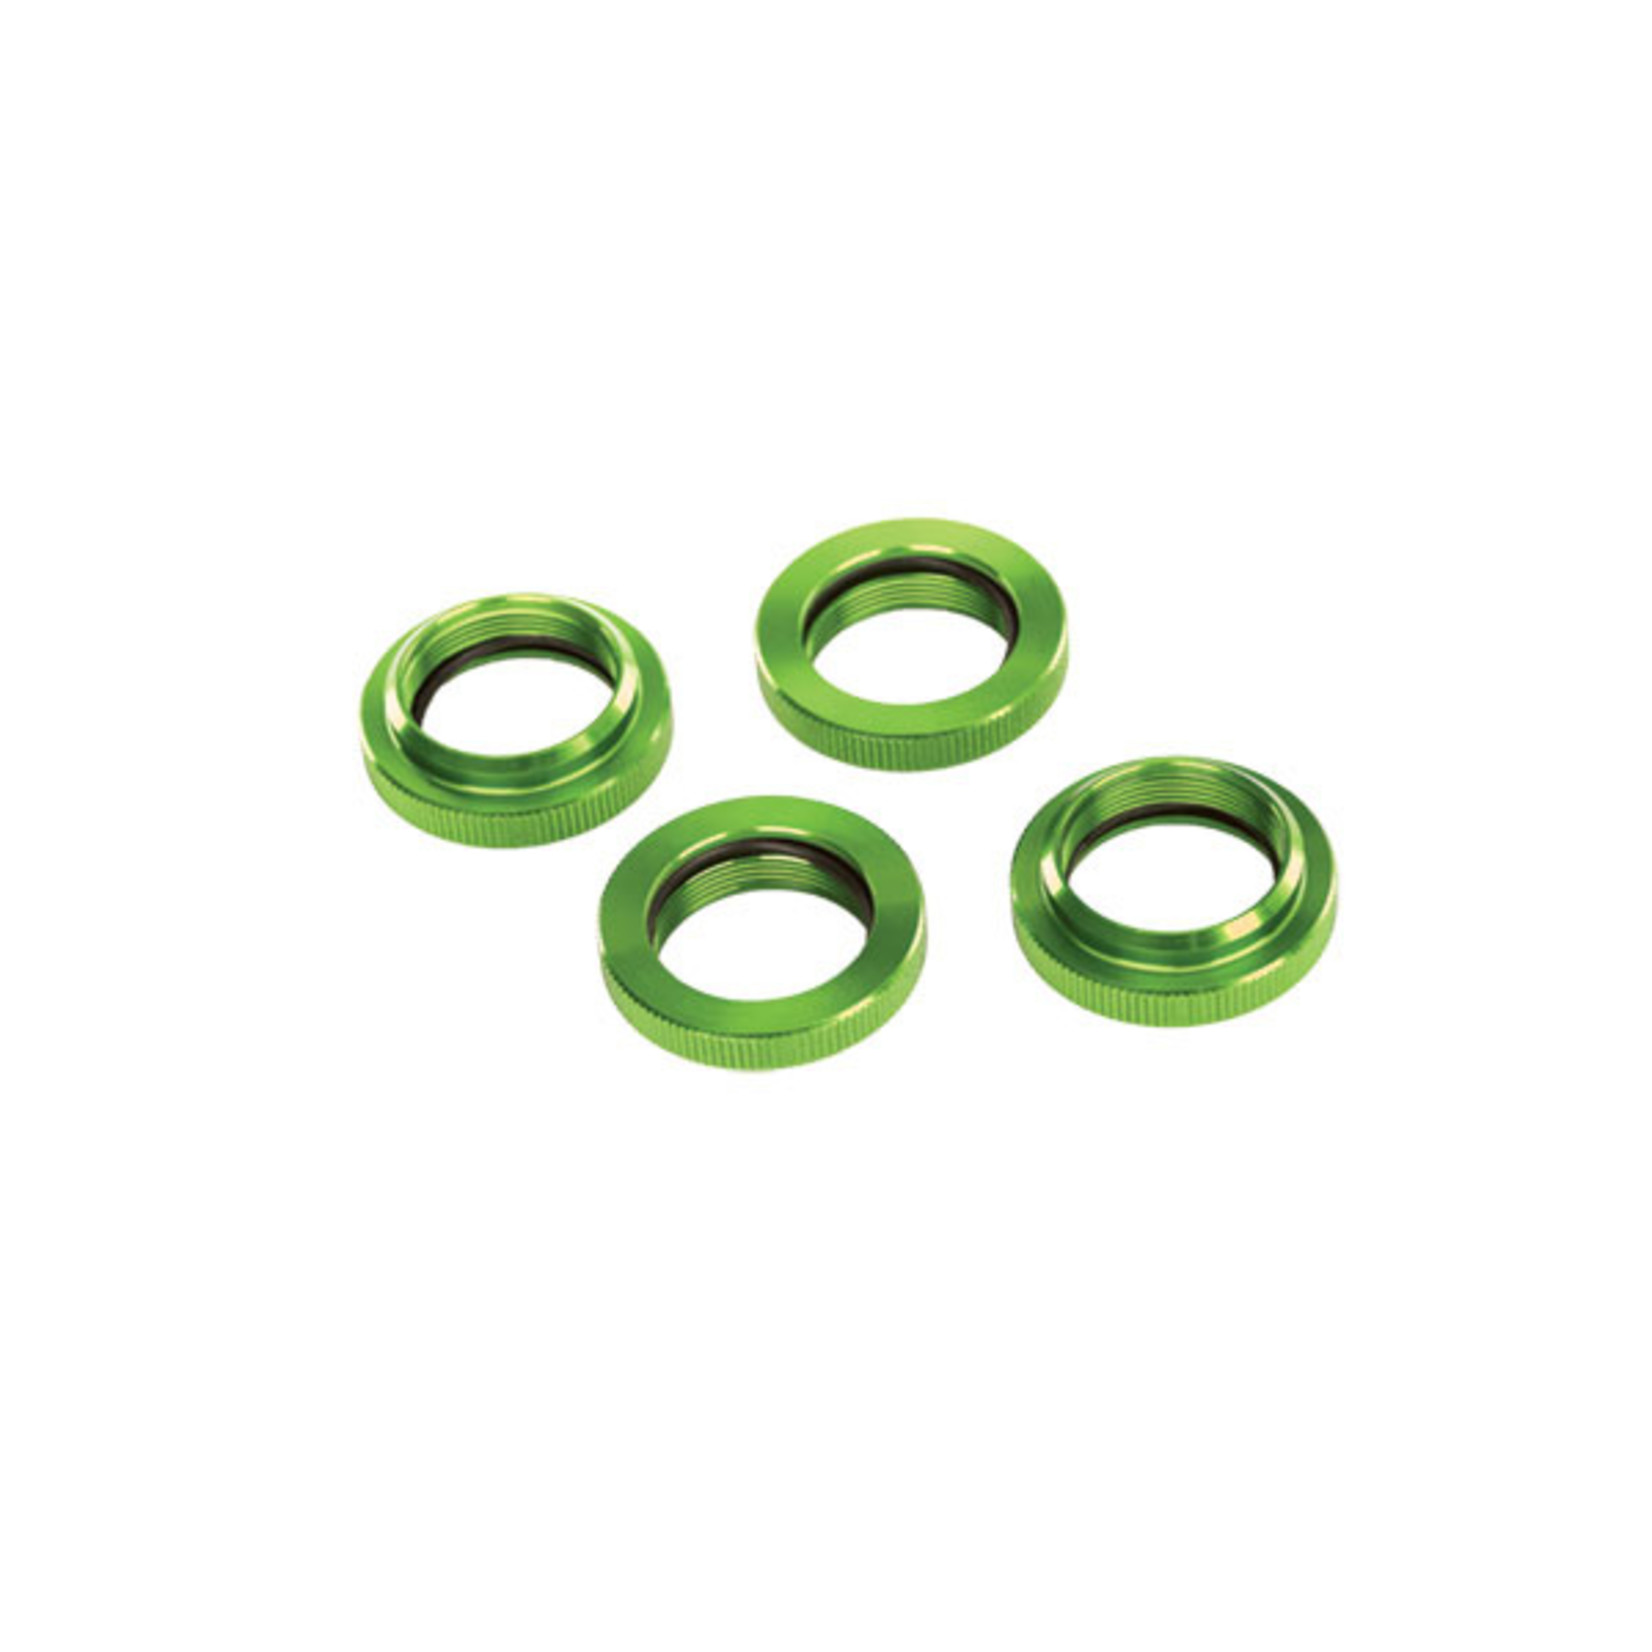 Traxxas 7767G - Spring retainer (adjuster), green-anodized